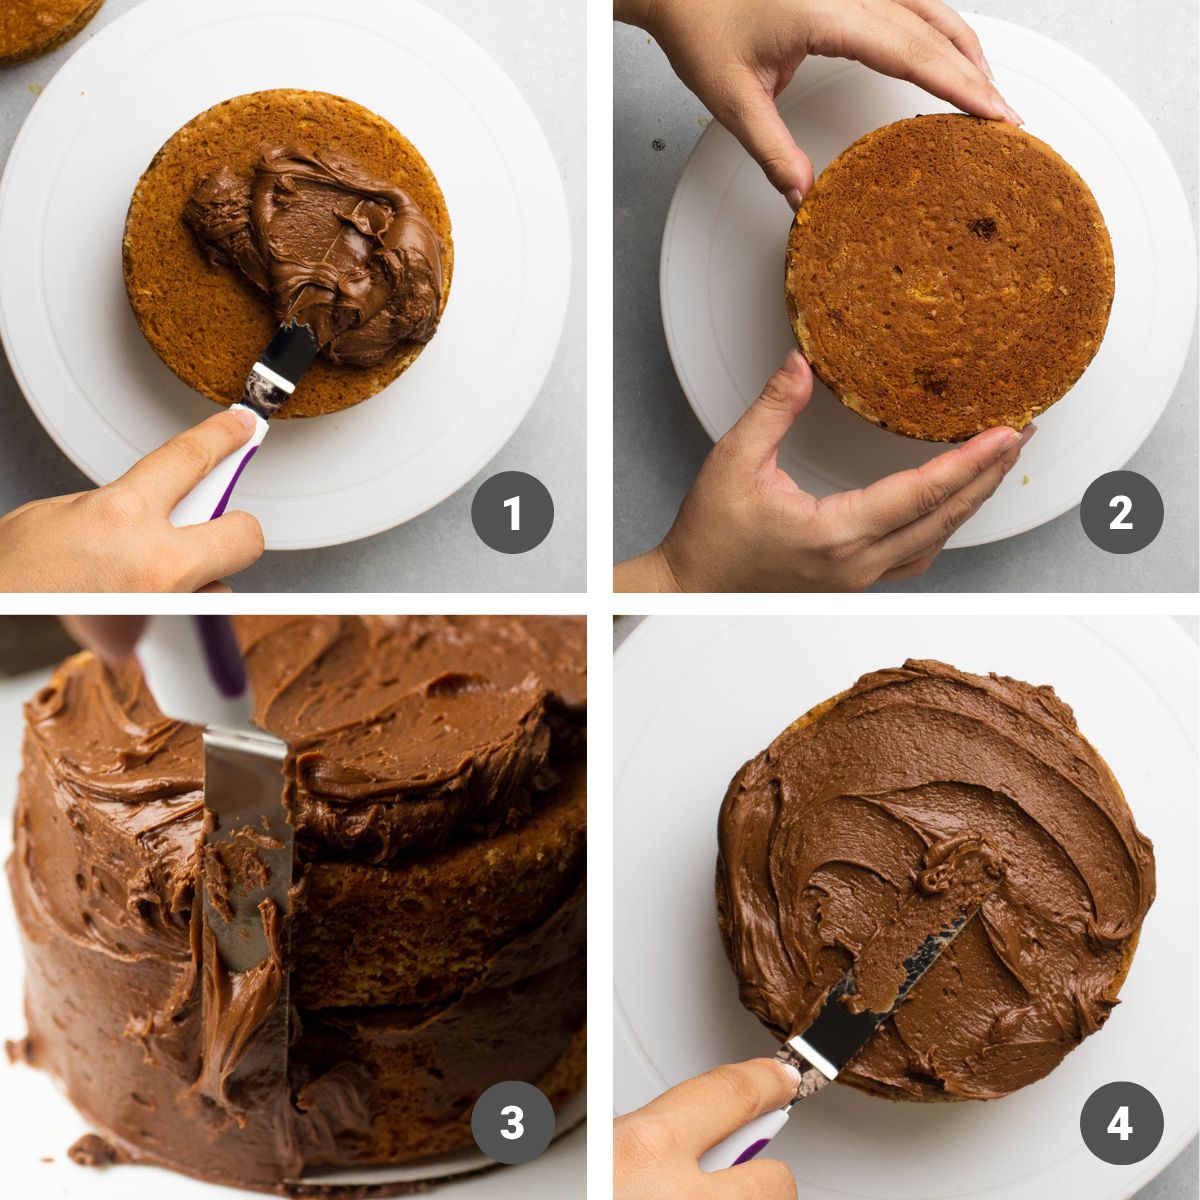 Offset spatula spreading chocolate frosting over cake.